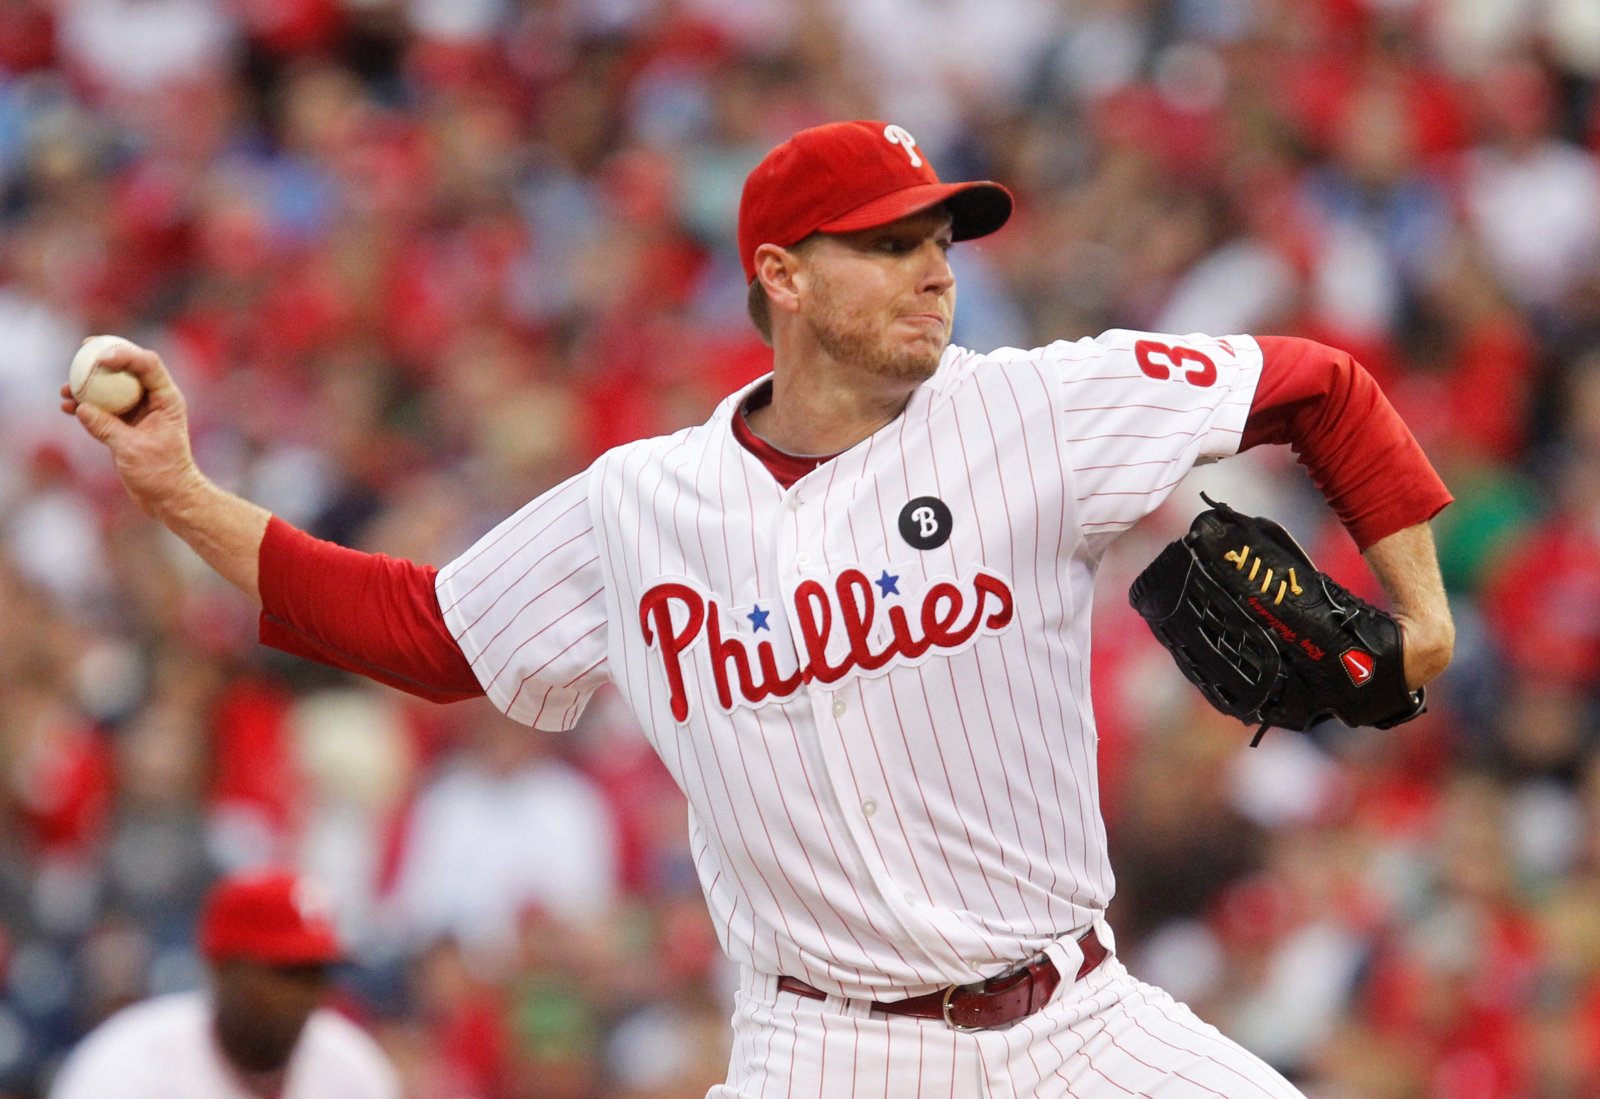 The Philadelphia Phillies embark on an interesting approach to